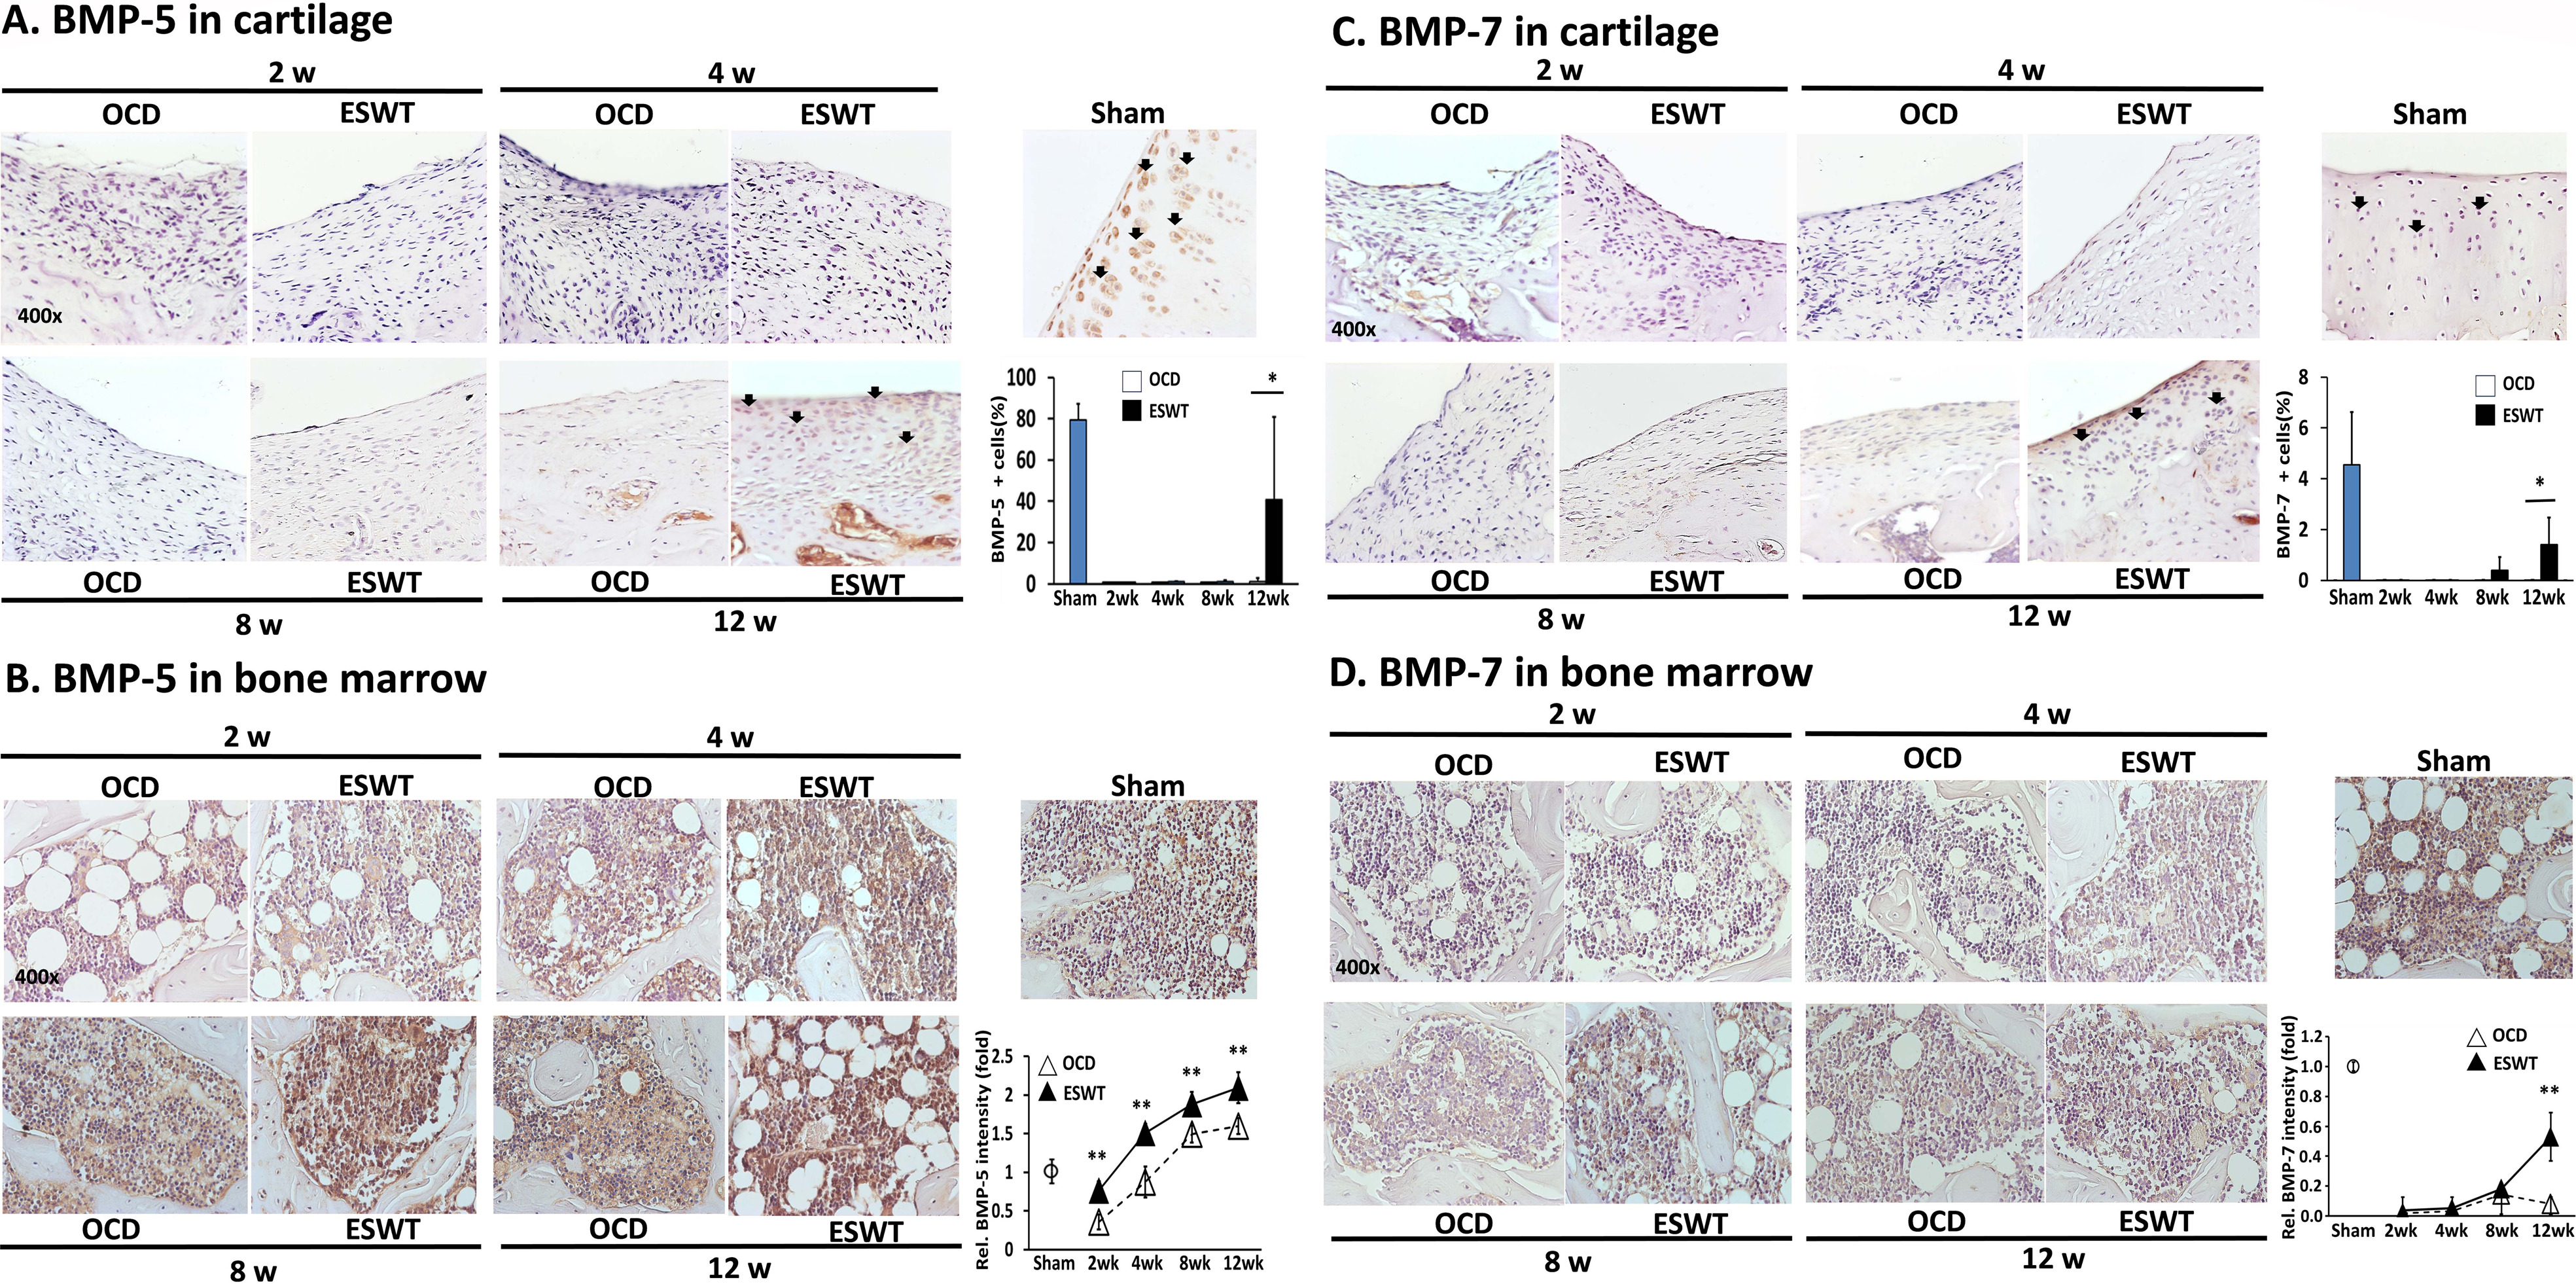 Fig. 6 
            The expression profiles of bone morphogenetic protein (BMP)-5 and BMP-7 in the cartilage and bone marrow of Sham, osteochondral defect (OCD), and extracorporeal shockwave therapy (ESWT) groups across various time intervals. Immunohistochemistry (IHC) images of BMP-5 expression are presented in a) the cartilage and b) the bone marrow, while images for BMP-7 expression are also taken from c) the cartilage and d) the bone marrow. All images were obtained at a magnification of 400×. The quantification of IHC stains includes the determination of the percentage of positive cells at the defect sites and the assessment of bone marrow cell intensity surrounding the subchondral bone regions in the respective panels. *p < 0.05 and **p < 0.01, compared between the OCD and ESWT groups (two-tailed paired t-test).
          